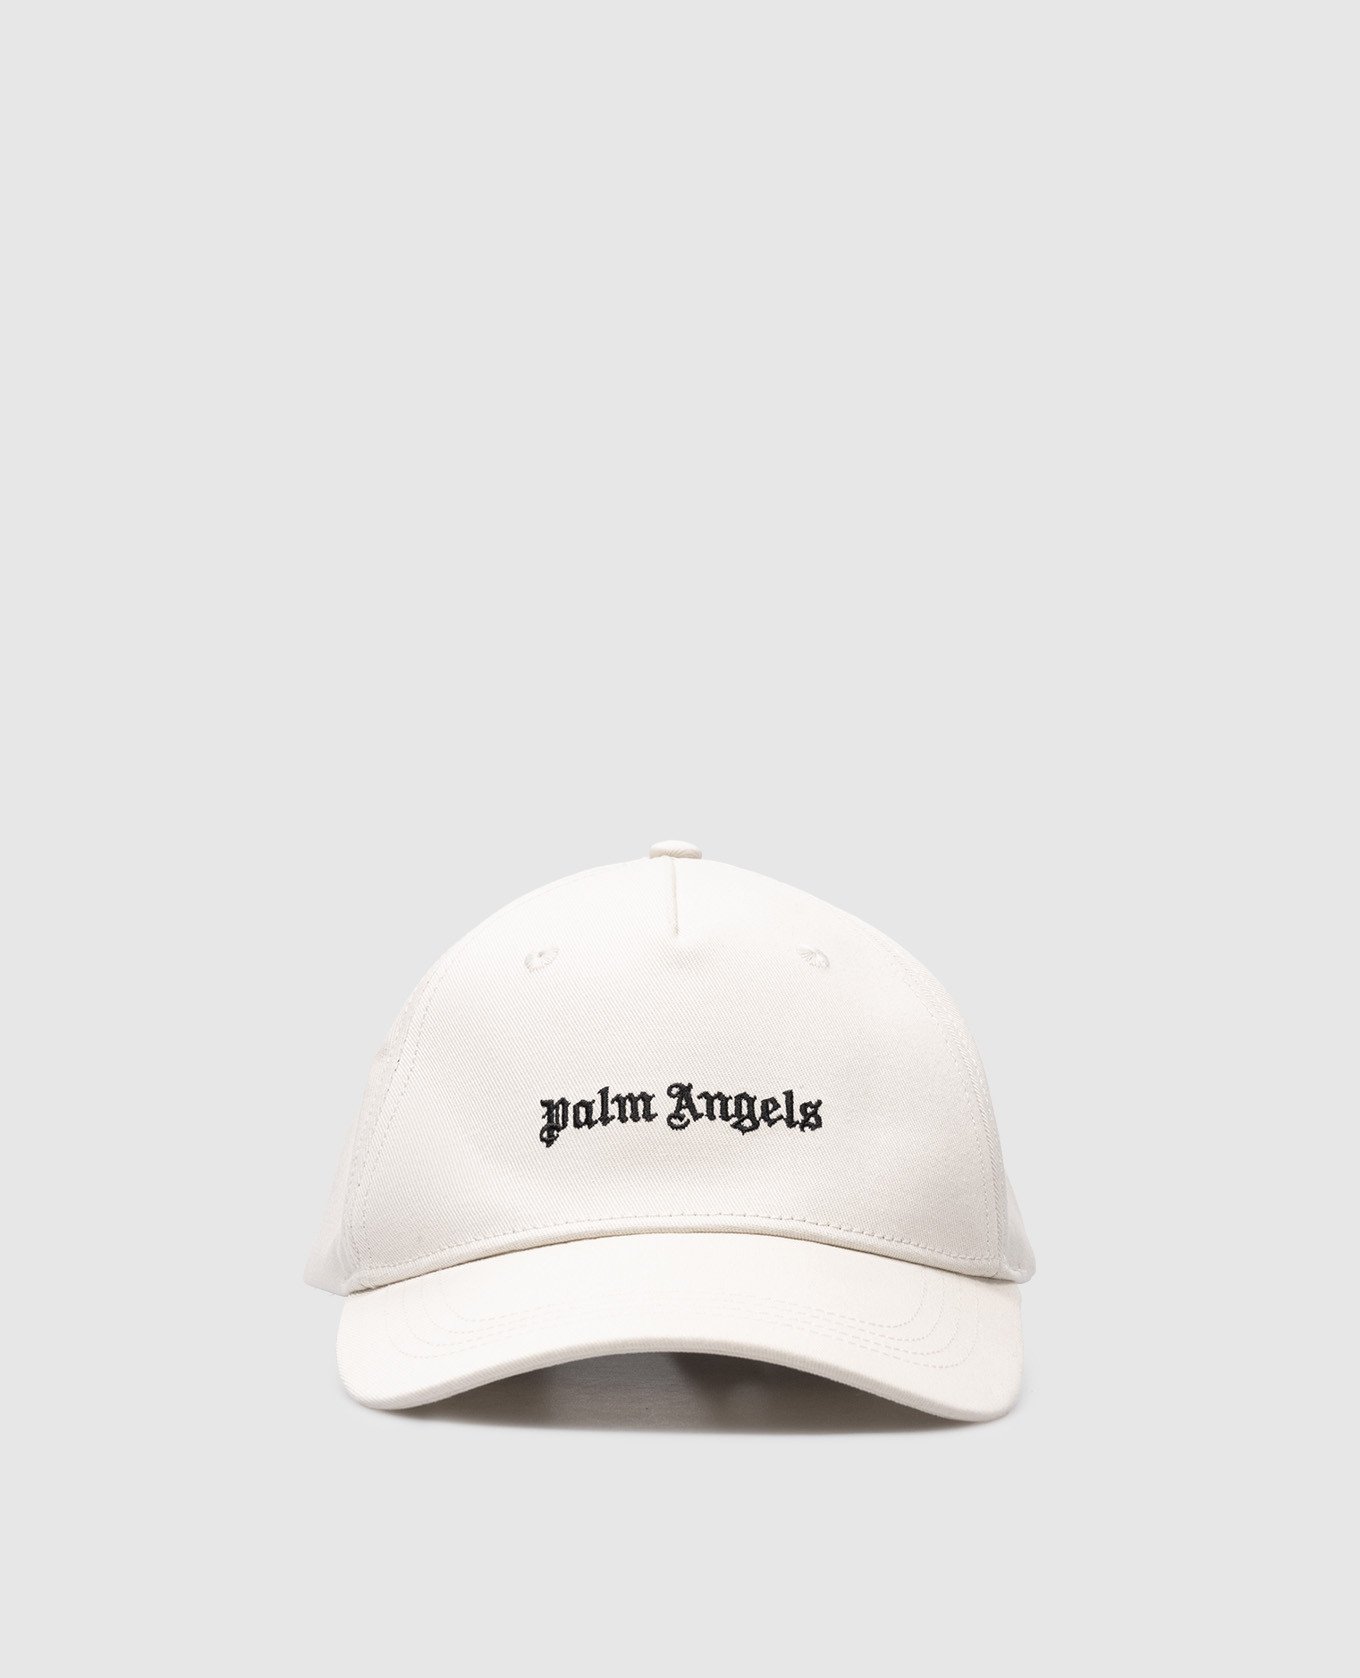 Beige cap with logo embroidery